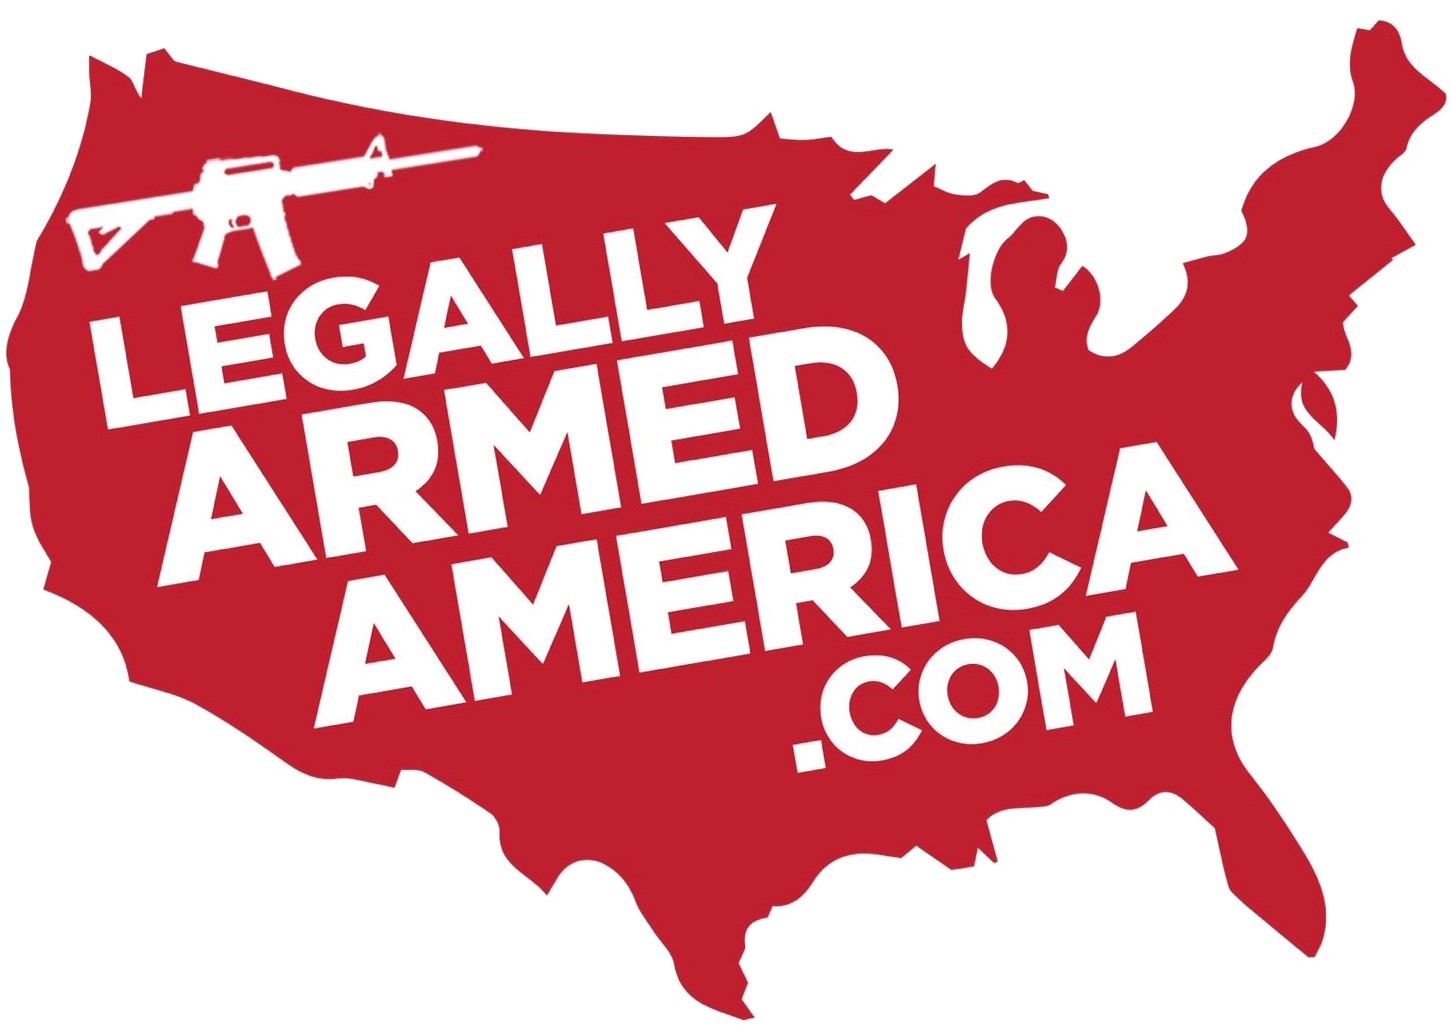 Legally Armed America